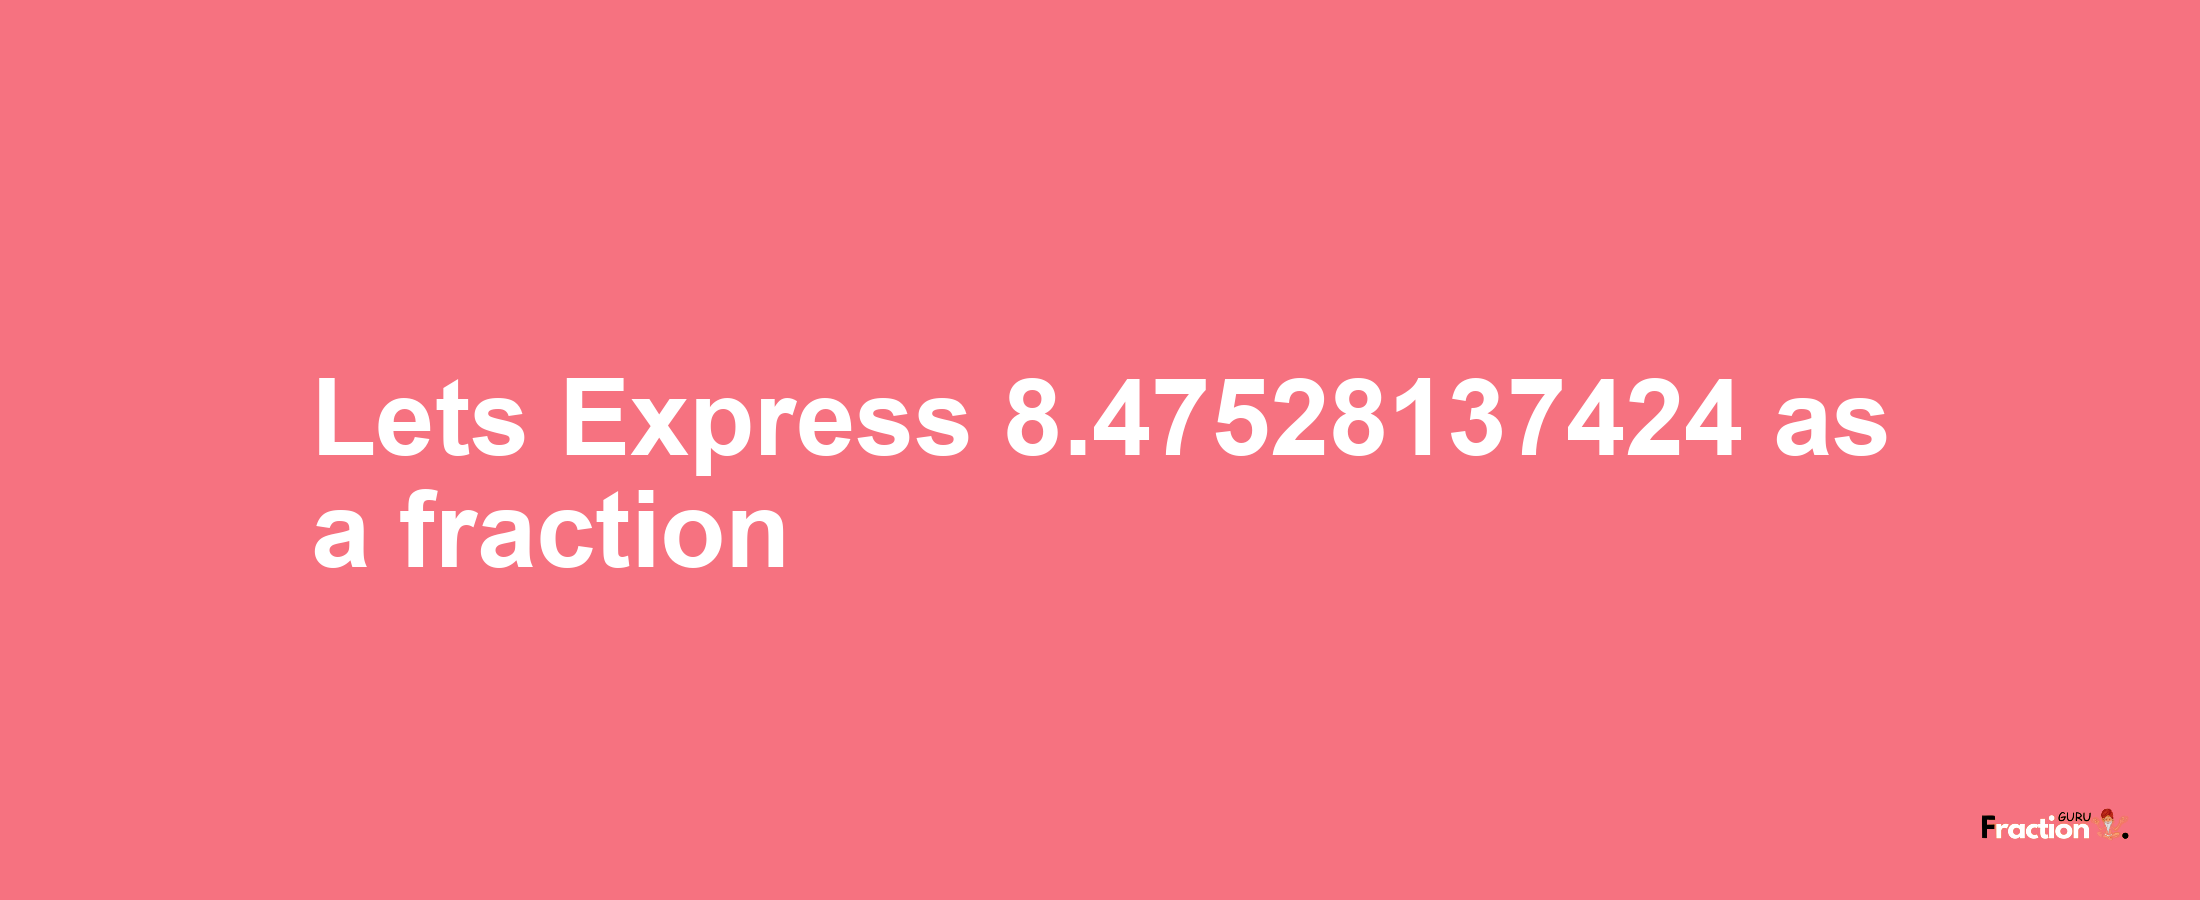 Lets Express 8.47528137424 as afraction